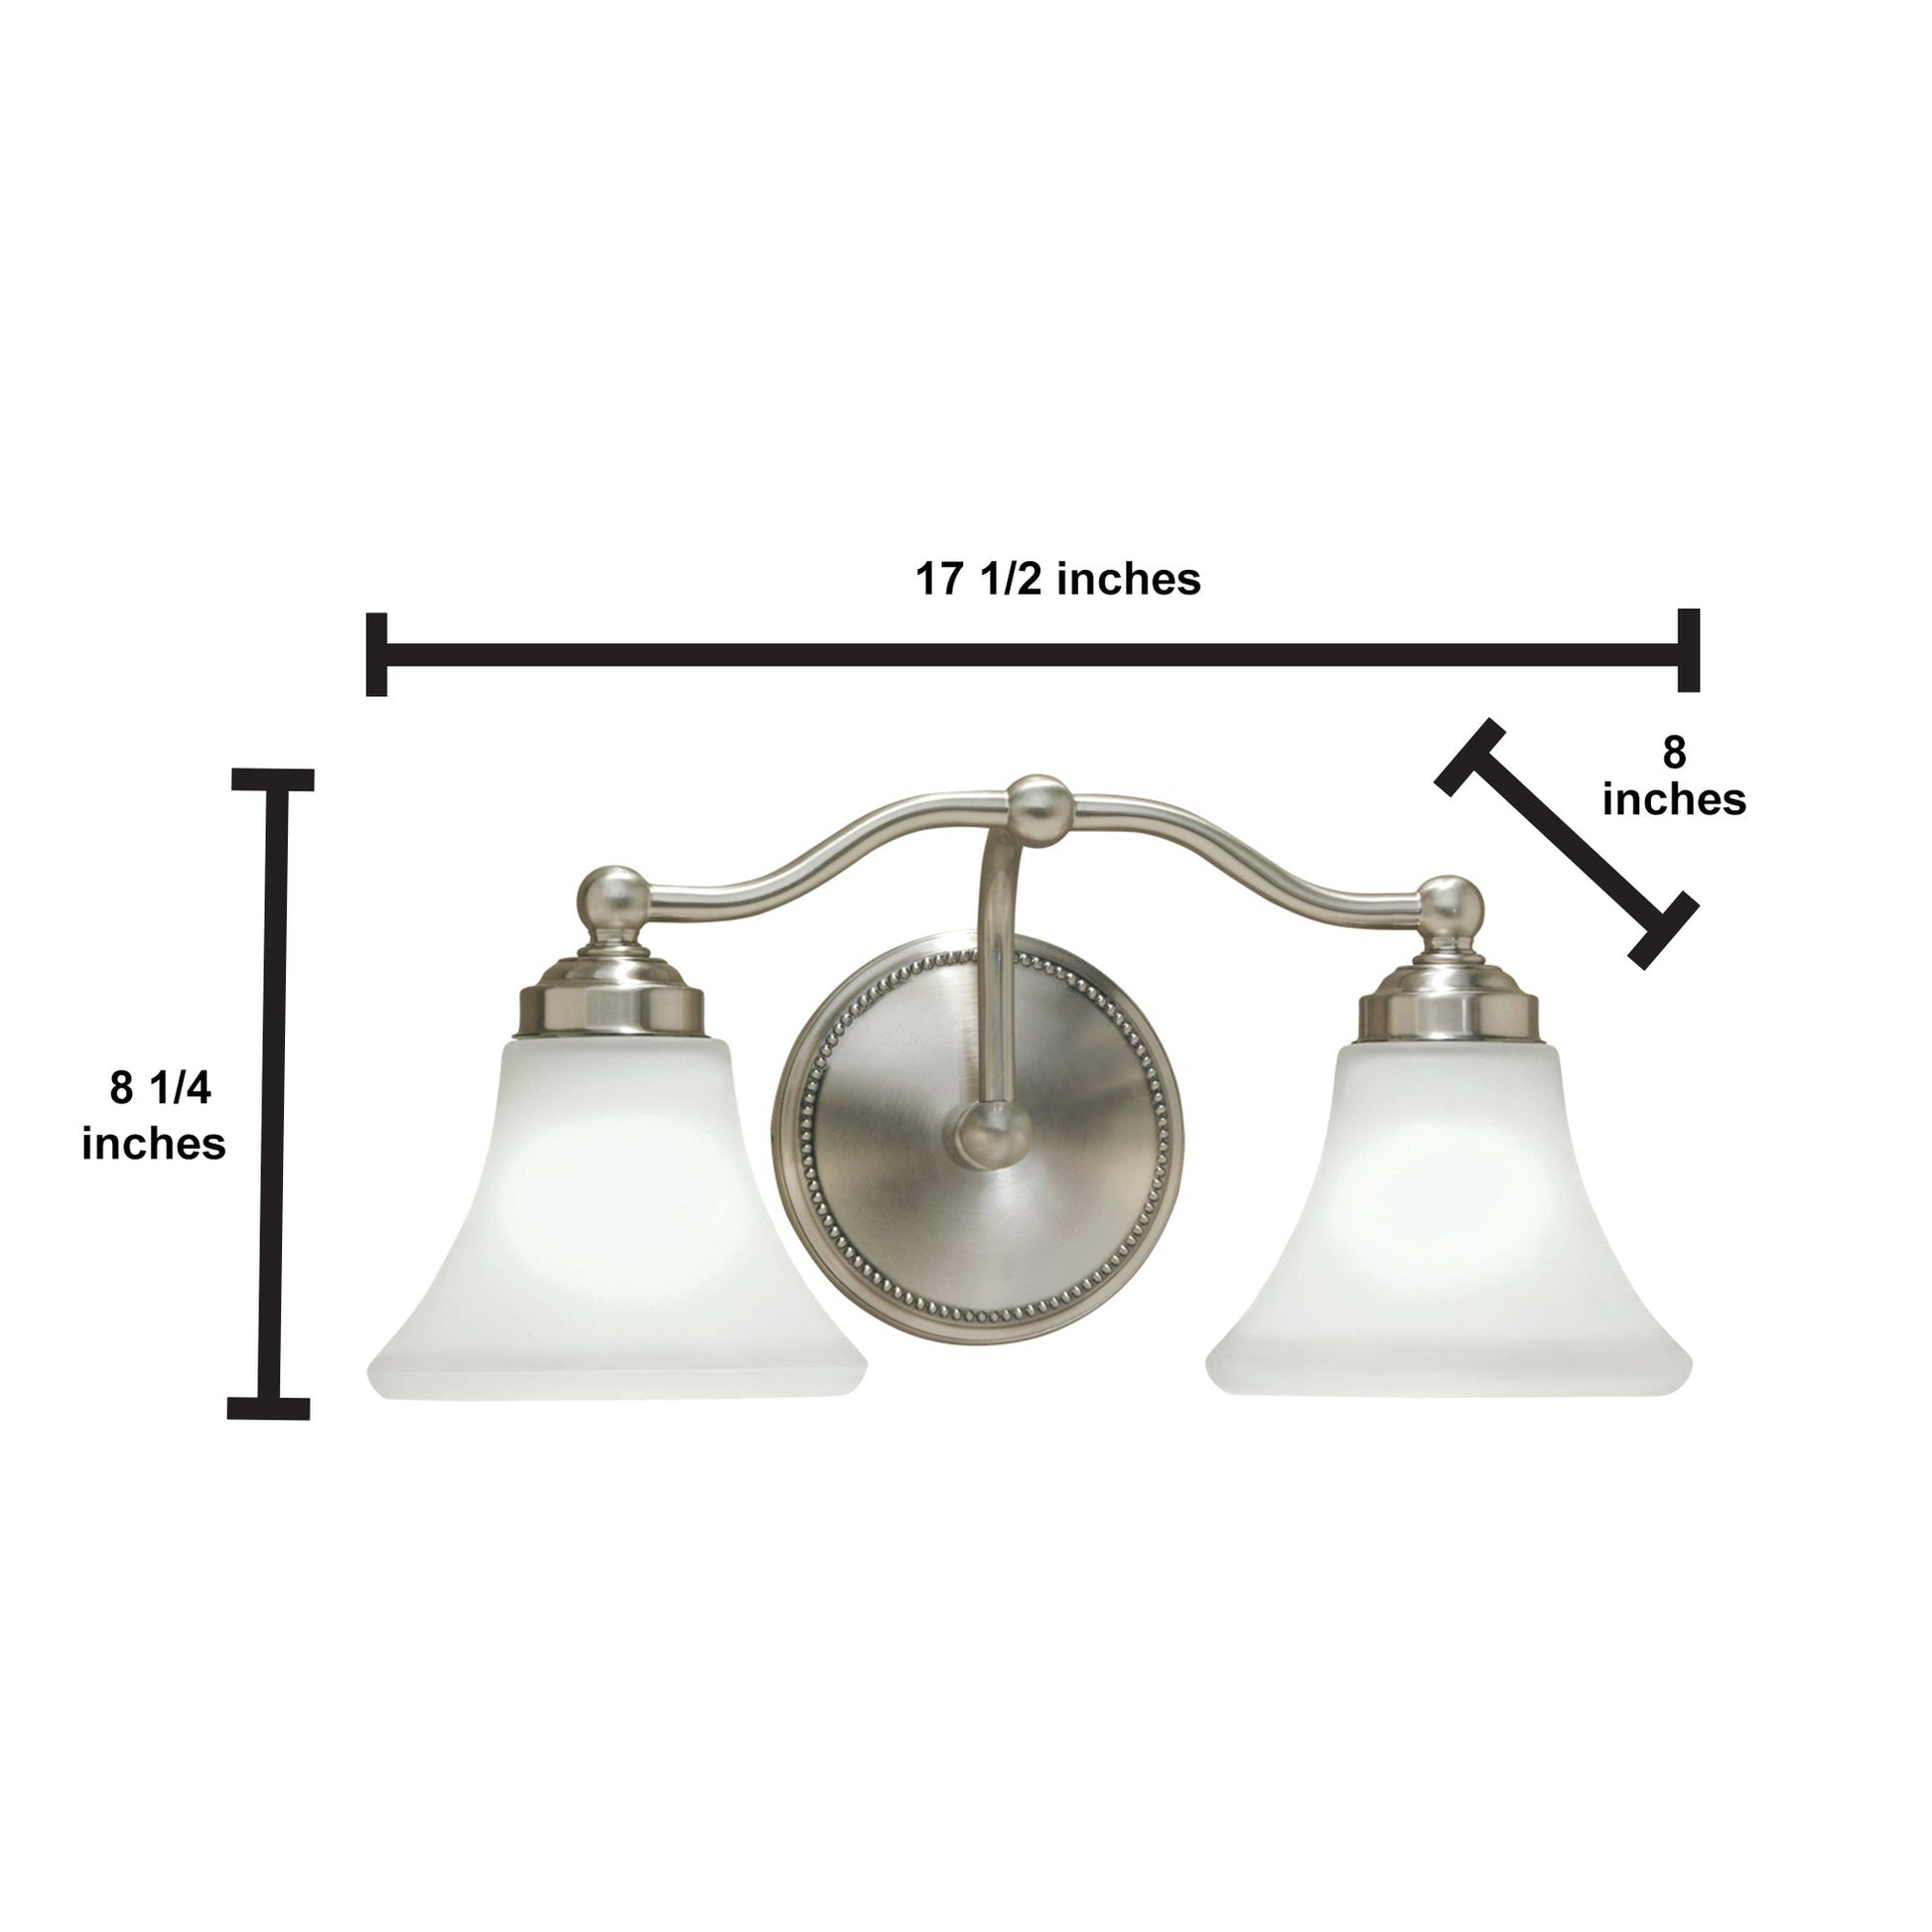 Norwell Lighting Soleil 8" x 18" 2-Light Sconce Chrome Vanity Light With Flared Glass Diffuser